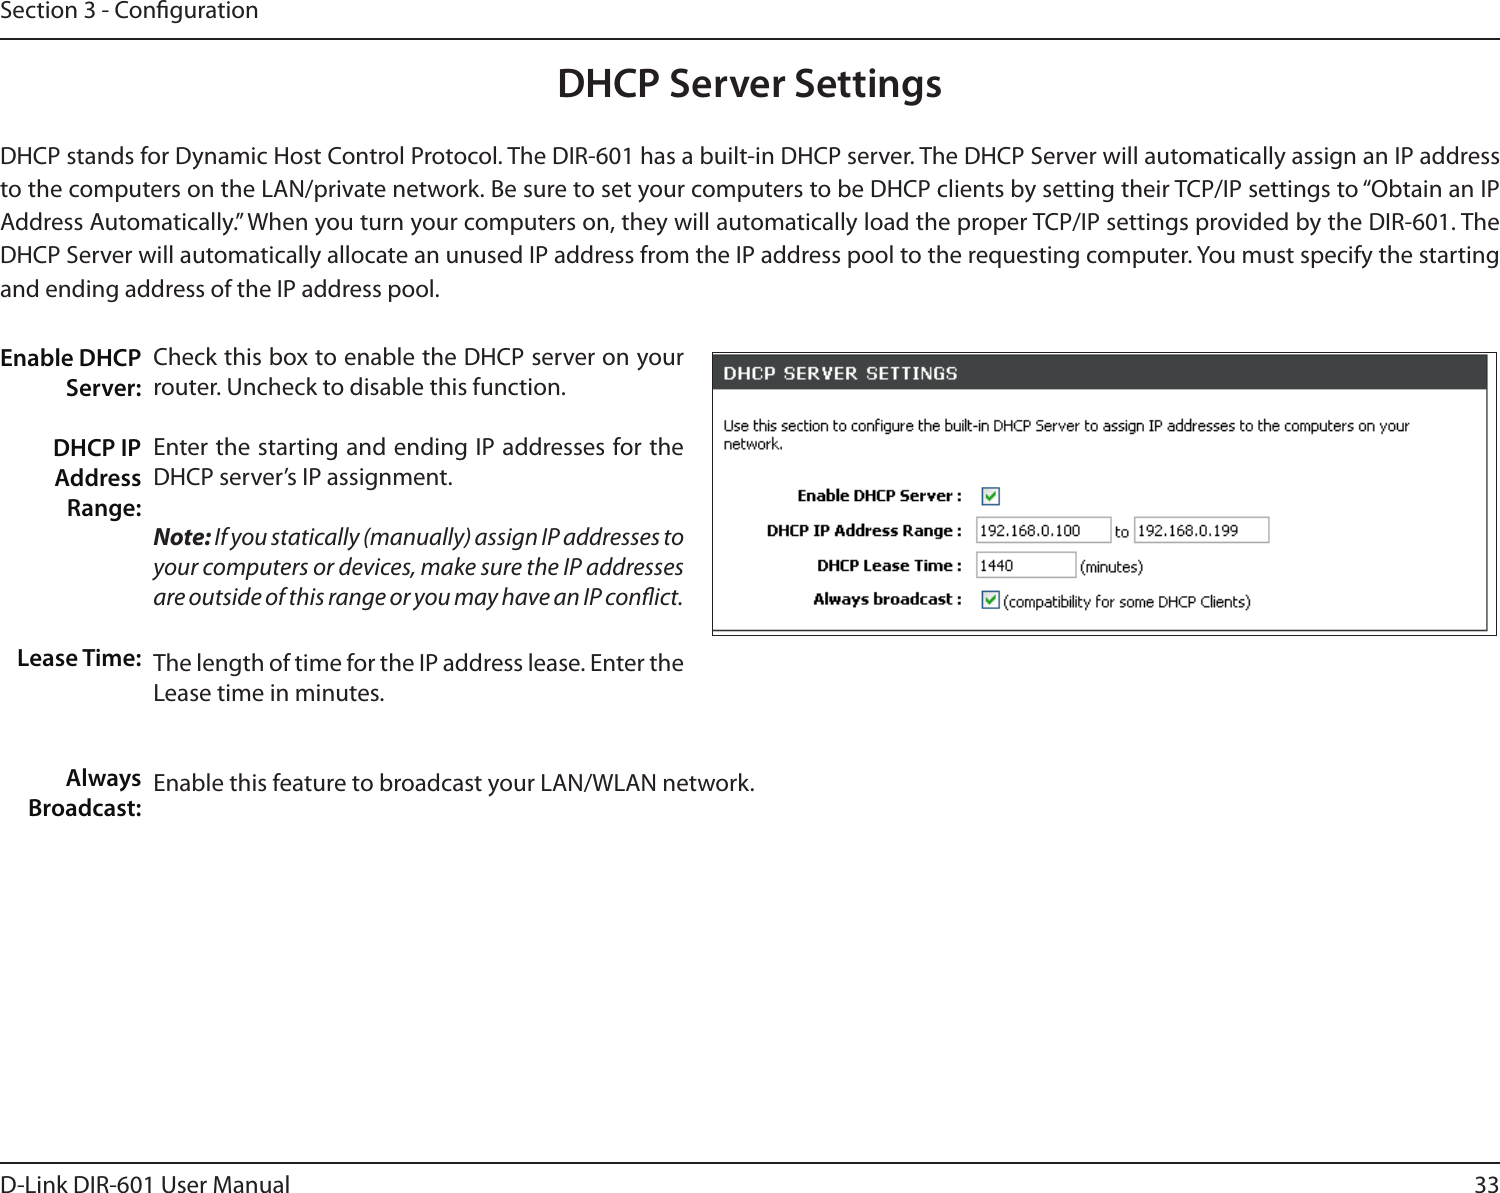 33D-Link DIR-601 User ManualSection 3 - CongurationCheck this box to enable the DHCP server on your router. Uncheck to disable this function.Enter the starting and ending IP addresses for the DHCP server’s IP assignment.Note: If you statically (manually) assign IP addresses to your computers or devices, make sure the IP addresses are outside of this range or you may have an IP conict. The length of time for the IP address lease. Enter the Lease time in minutes.Enable this feature to broadcast your LAN/WLAN network. Enable DHCP Server:DHCP IP Address Range:Lease Time:Always Broadcast:DHCP Server SettingsDHCP stands for Dynamic Host Control Protocol. The DIR-601 has a built-in DHCP server. The DHCP Server will automatically assign an IP address to the computers on the LAN/private network. Be sure to set your computers to be DHCP clients by setting their TCP/IP settings to “Obtain an IP Address Automatically.” When you turn your computers on, they will automatically load the proper TCP/IP settings provided by the DIR-601. The DHCP Server will automatically allocate an unused IP address from the IP address pool to the requesting computer. You must specify the starting and ending address of the IP address pool.